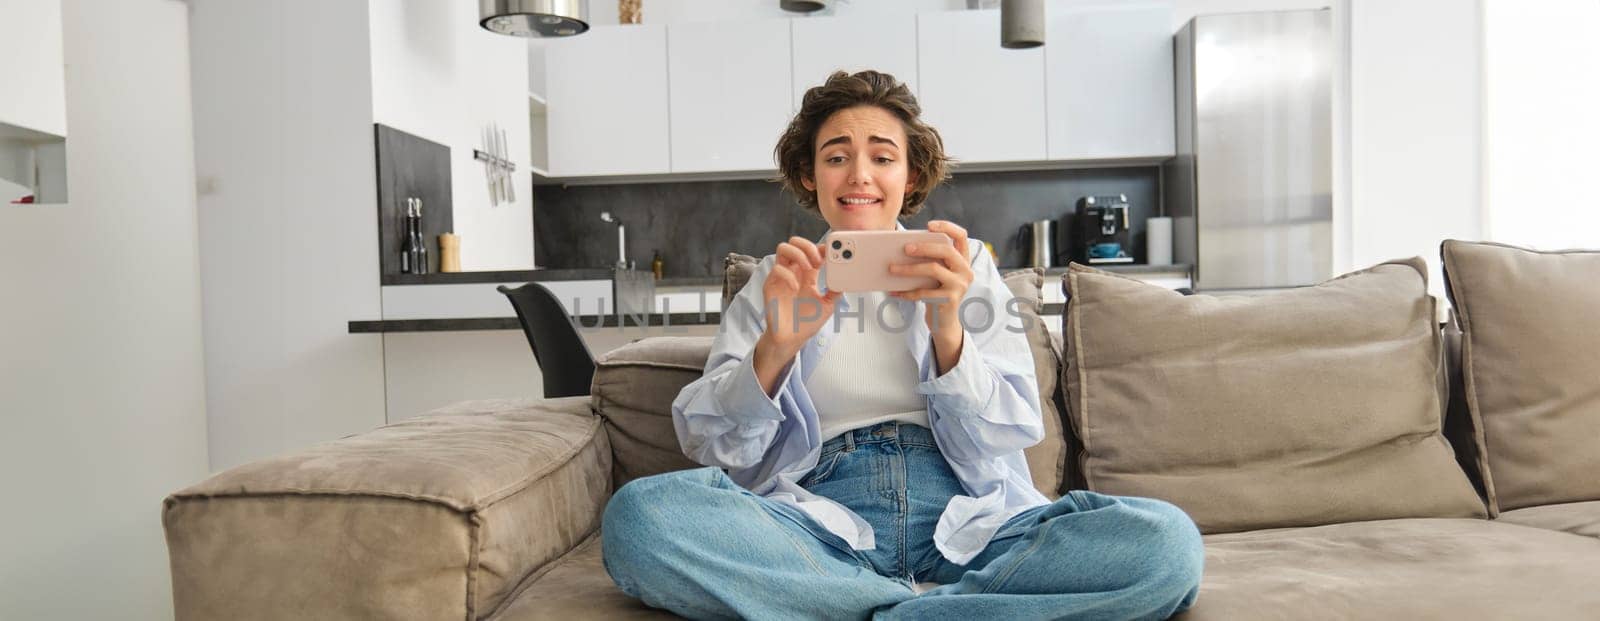 Portrait of woman playing mobile phone games, watching video with excited face, using smartphone for leisure, sits on sofa at home. Lifestyle and people concept